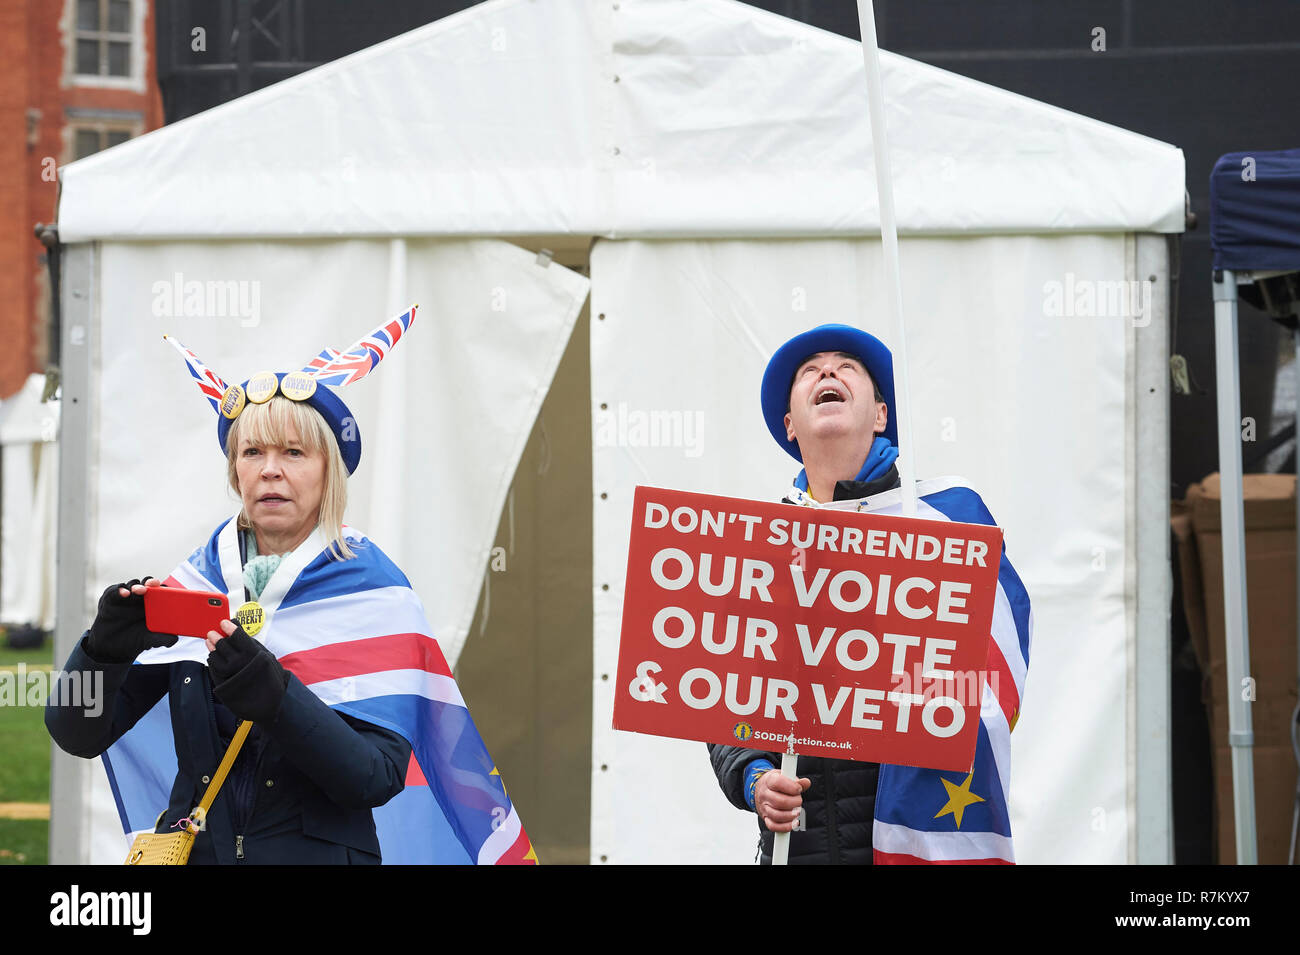 Westminster, London, UK. 10th December 2018, Westminster, London. Both Anti and Pro Brexit Supporters protested outside Parliament while Theresa May delivered the news that the Vote on Brexit was cancelled. Steven Bray Credit: Thomas Bowles/Alamy Live News Stock Photo